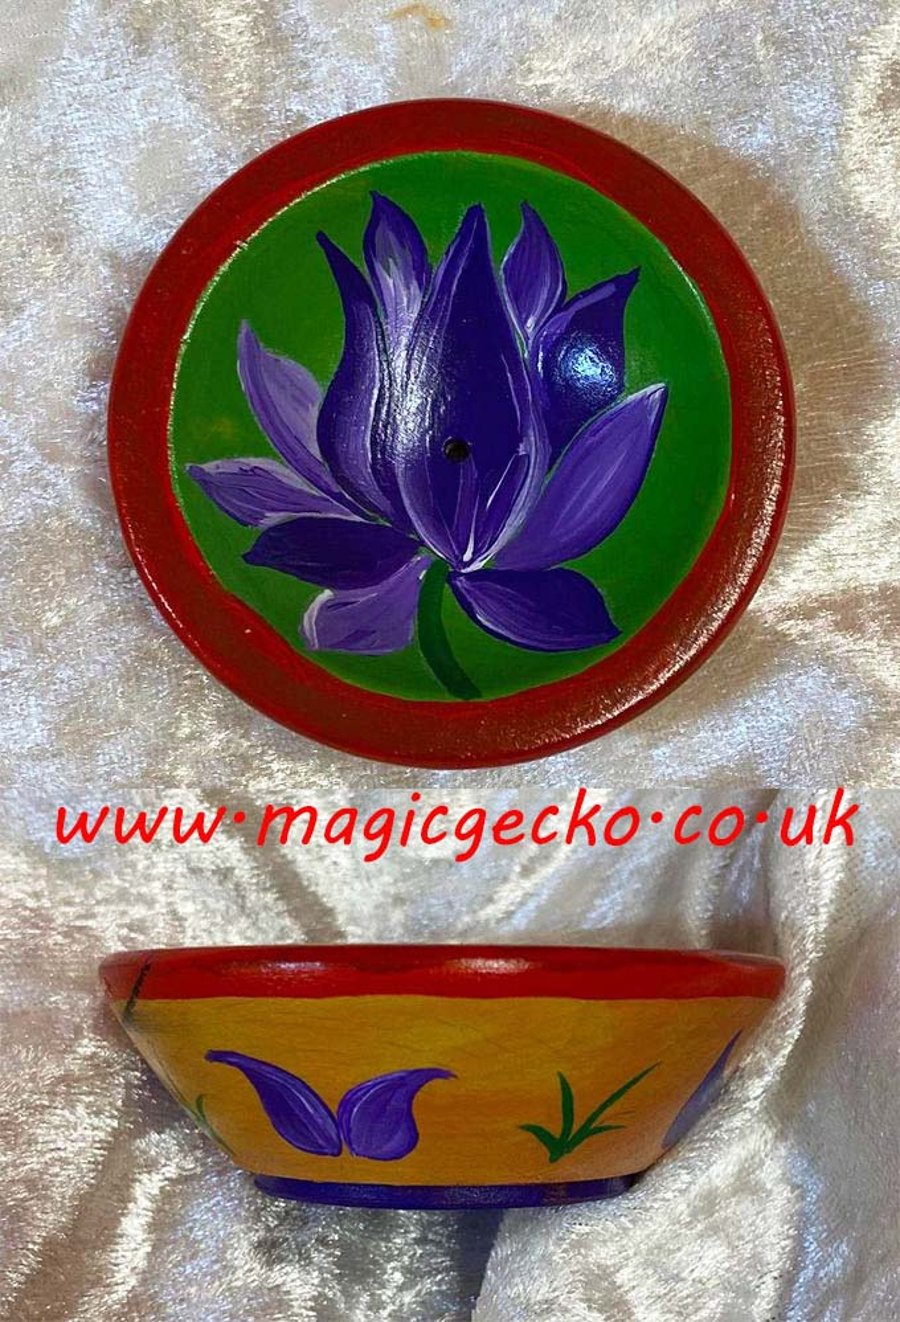 Incense Catcher - 7cm wide- Hand painted